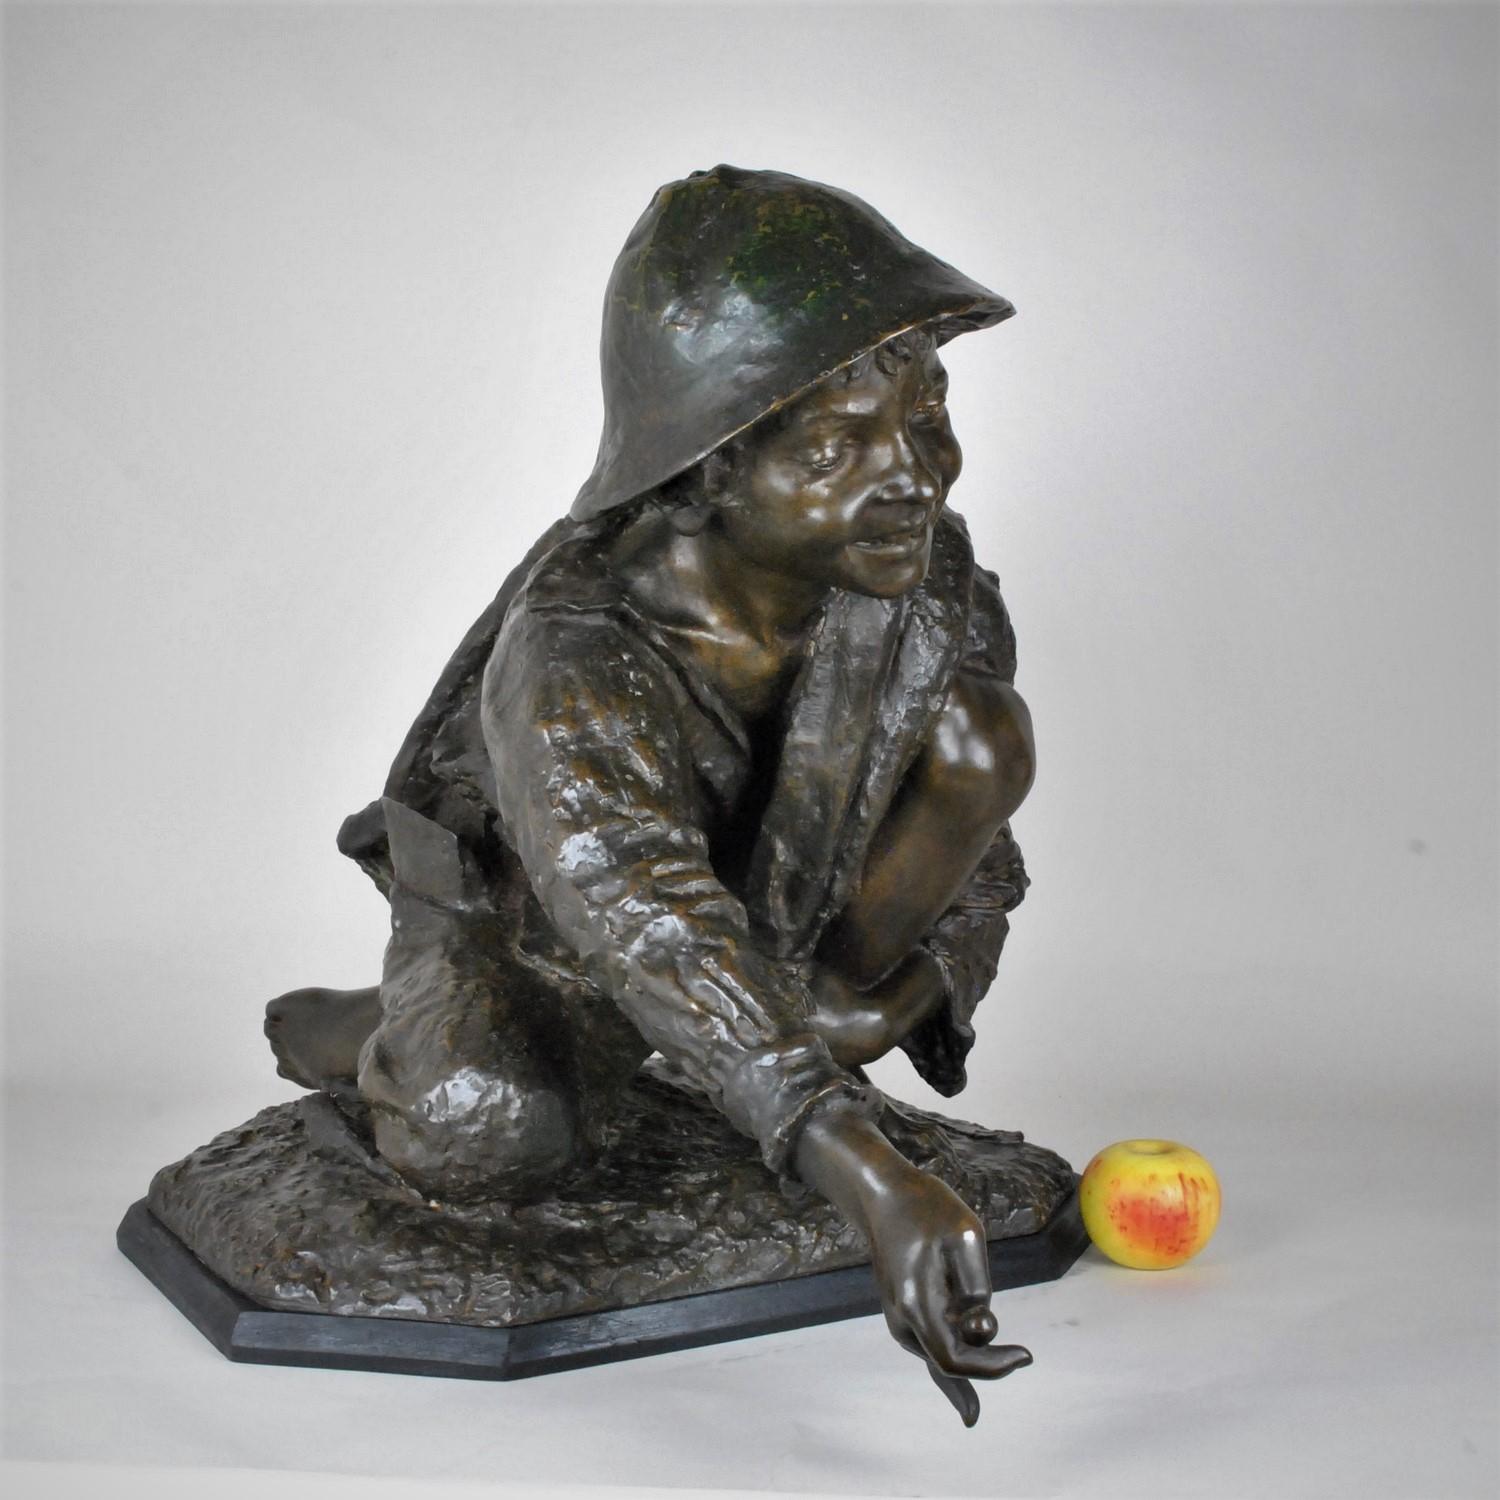 Large bronze with brown patina representing a young marbles player: squatting, arm outstretched, he is about to shoot his marble

Wooden base

Sculpture signed by the Italian artist Enrico Astorri (1859-1921)

Wear of time (see photos )

Measures: